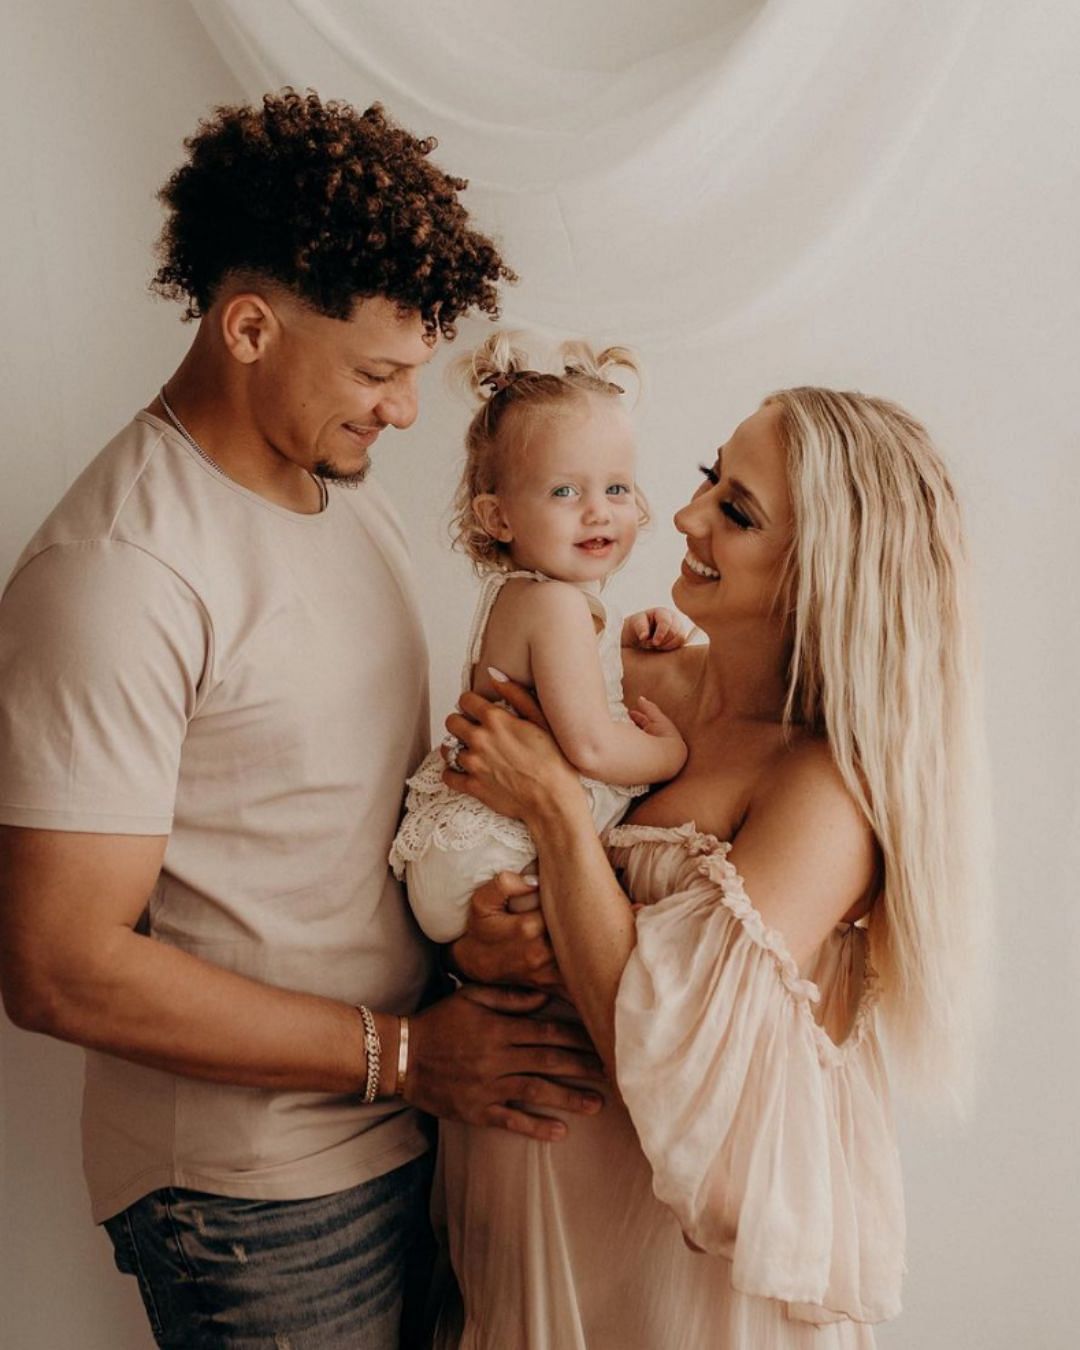 Brittany and Patrick Mahomes w/ Sterling and their baby boy. Source: @brittanylynne (IG)